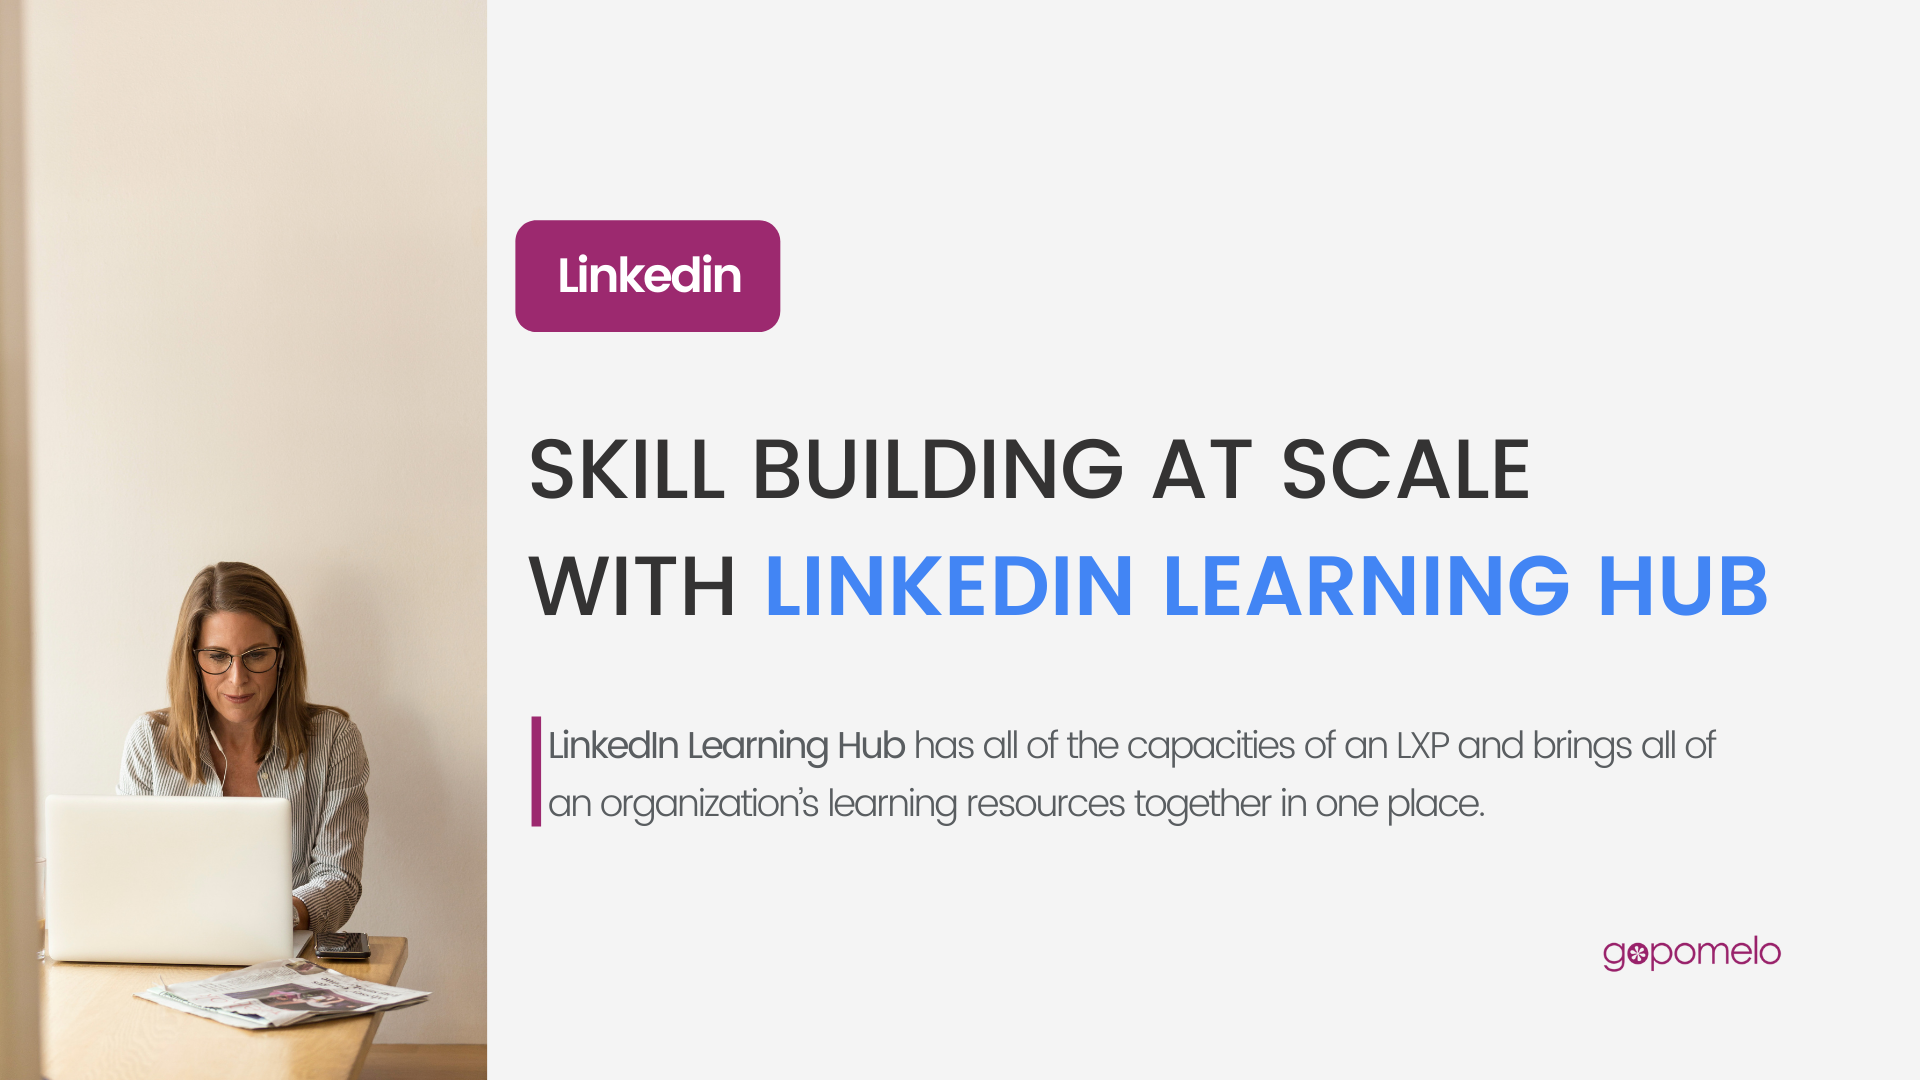 LinkedIn: Skill Building at Scale with LinkedIn Learning Hub